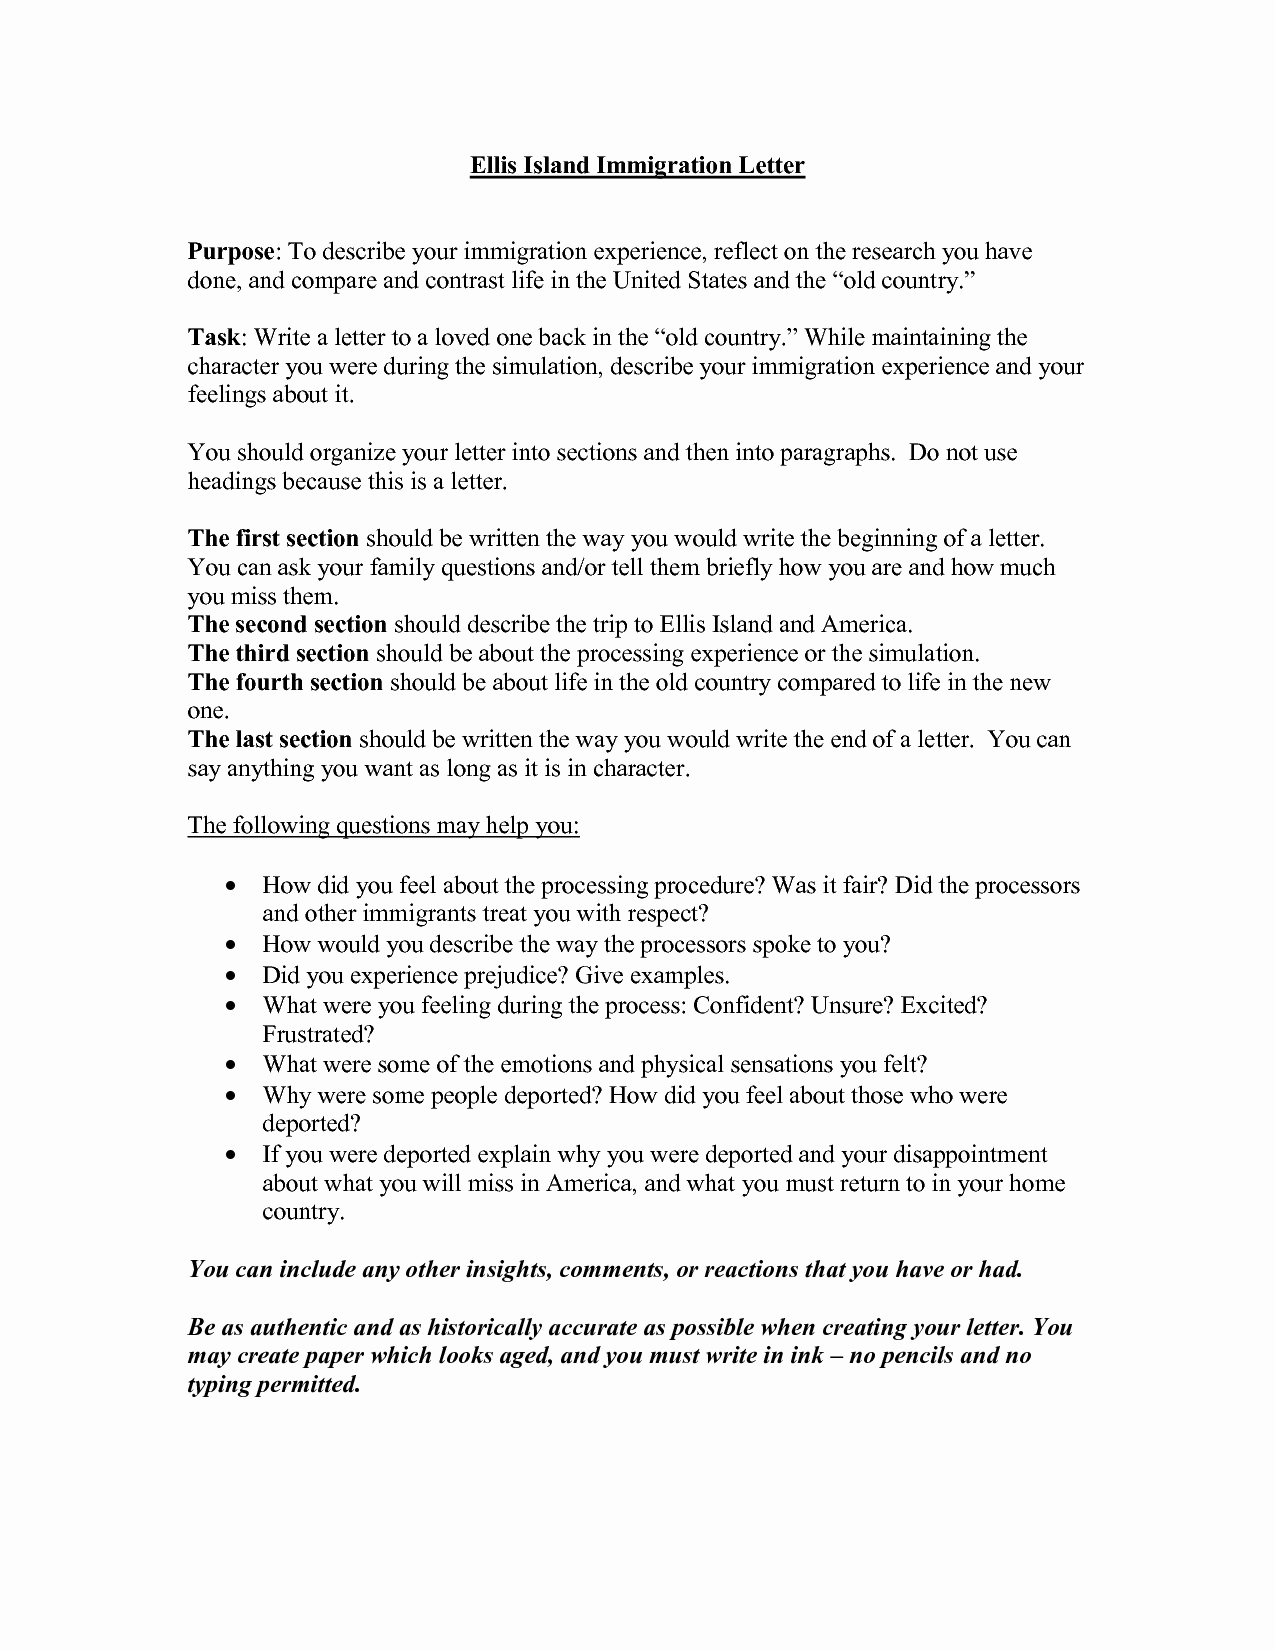 Example Reference Letter for Immigration Purpose